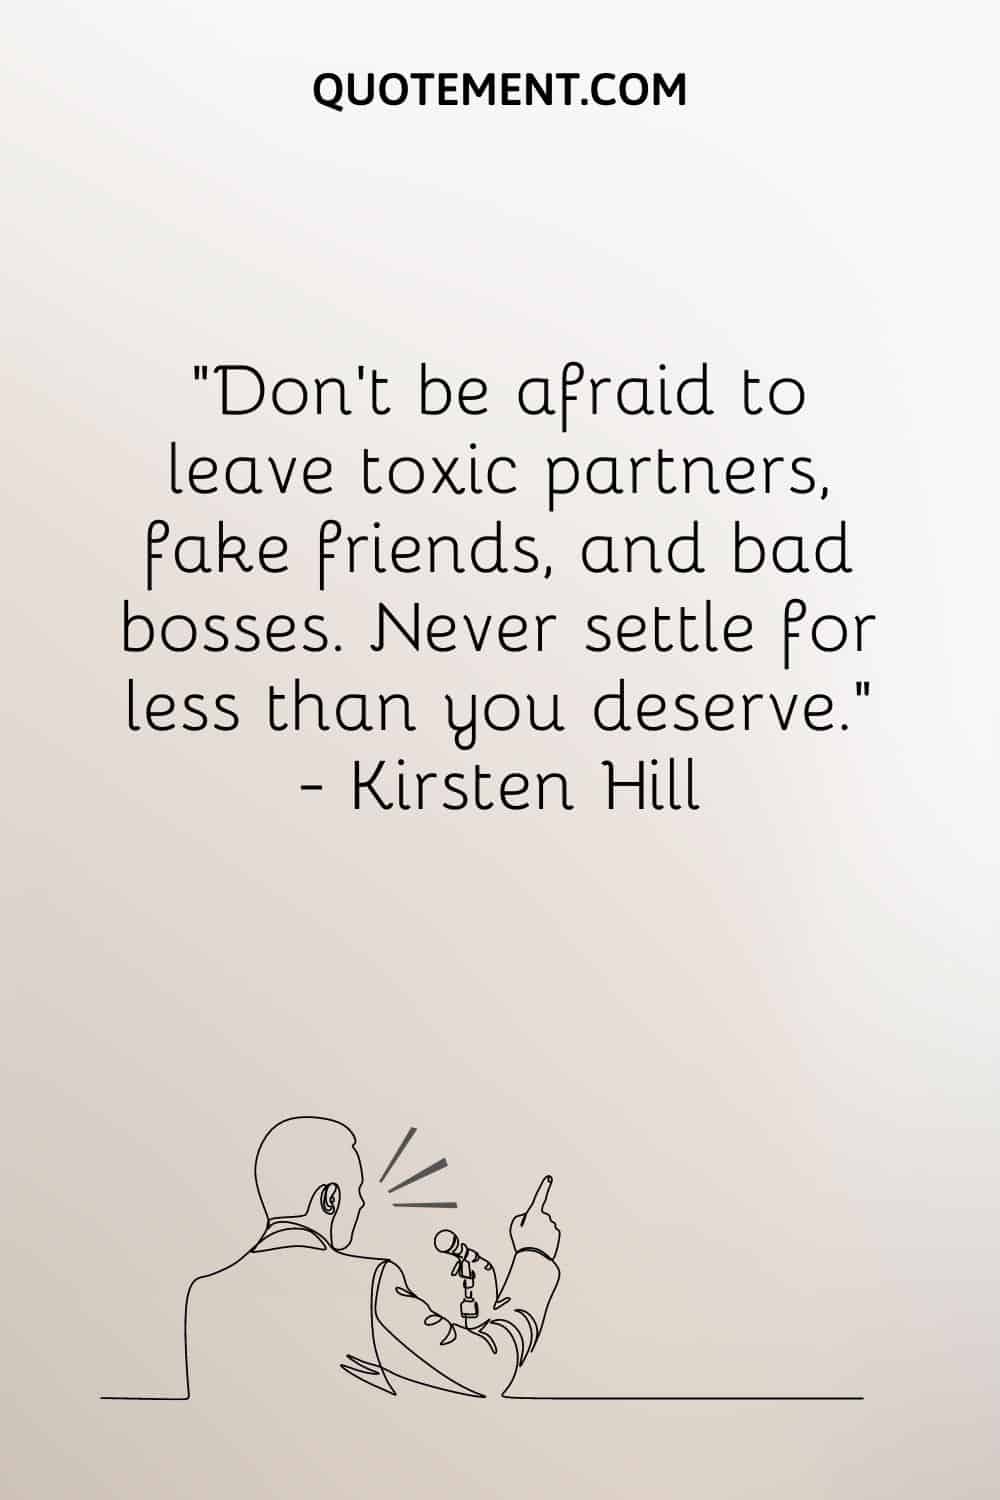 Don’t be afraid to leave toxic partners, fake friends, and bad bosses